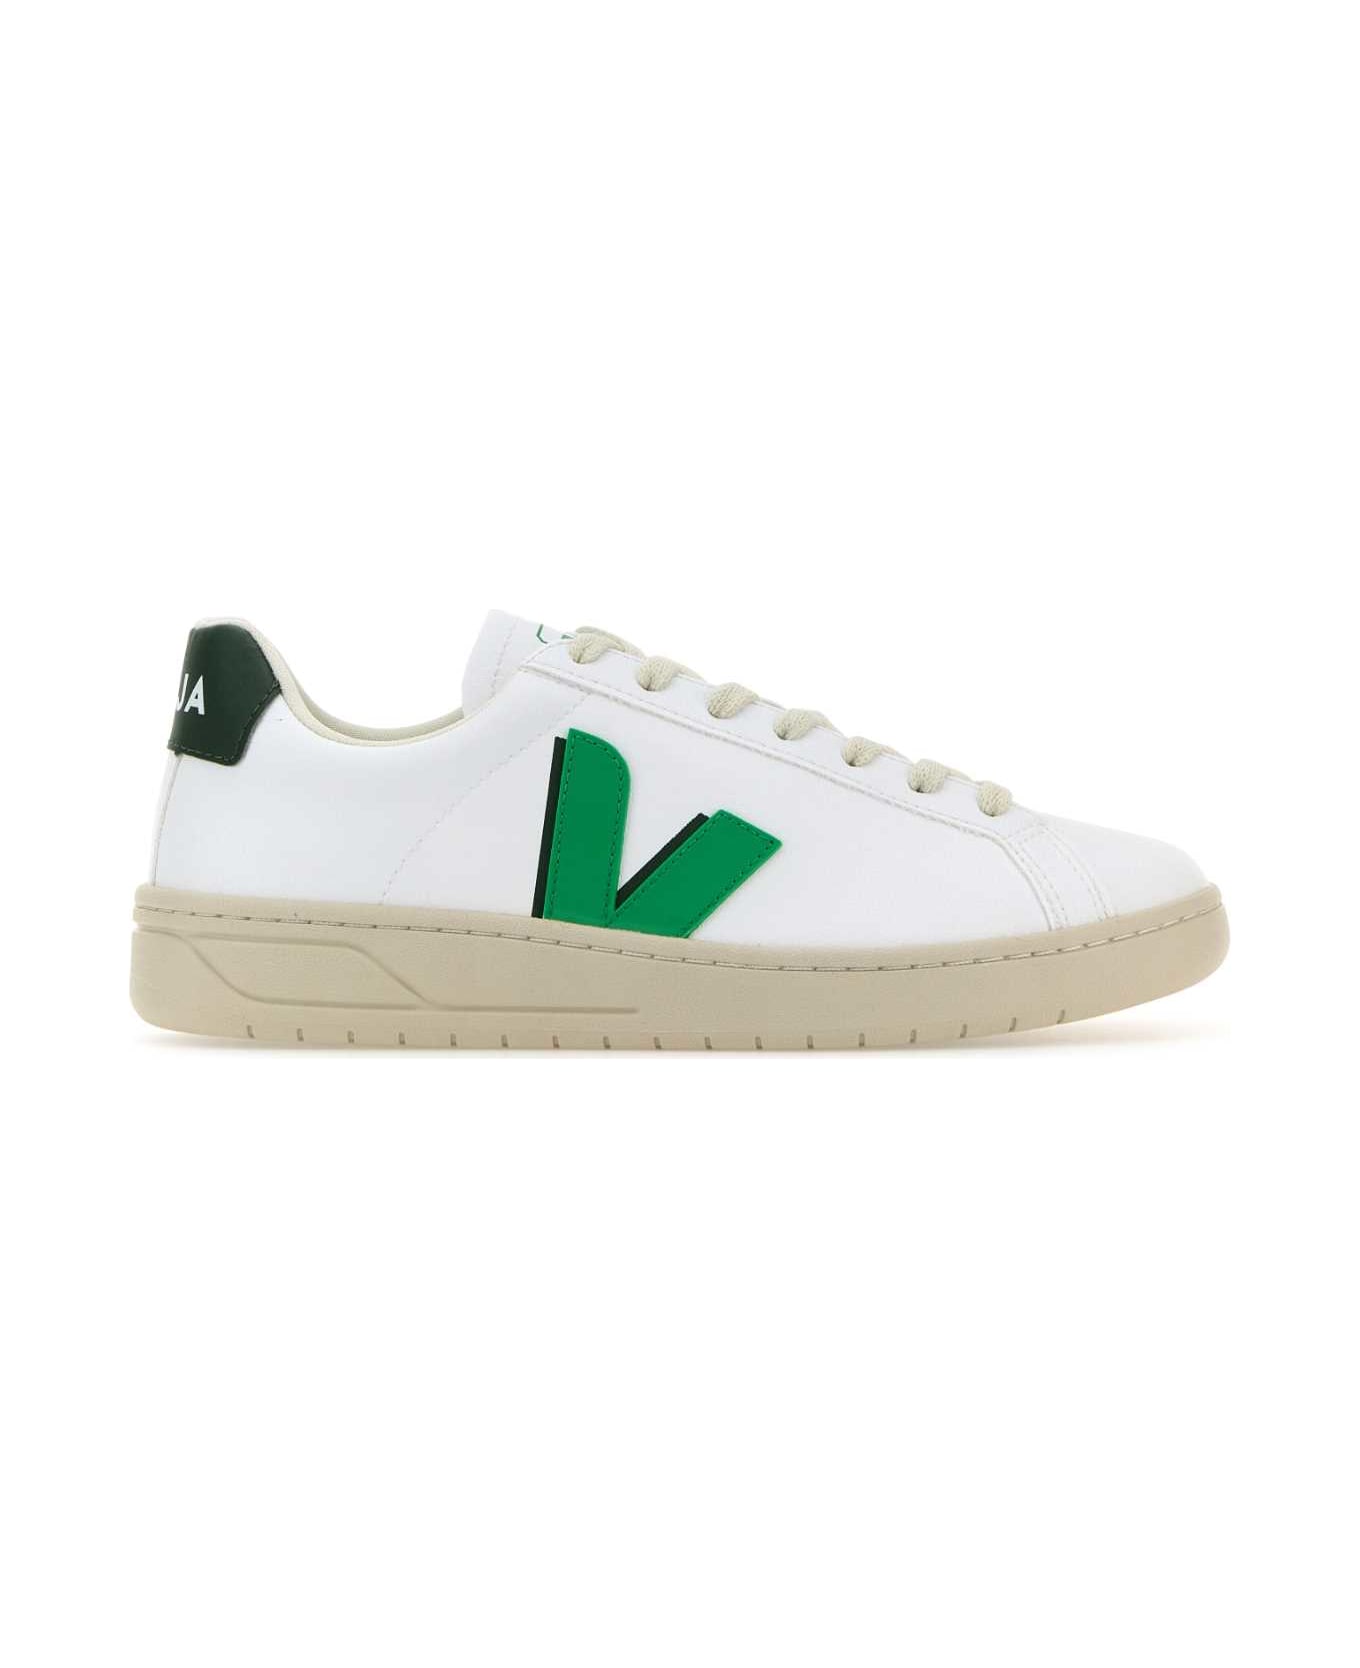 Veja White Synthetic Leather Urca Sneakers - WHITELEAFCYPRUS